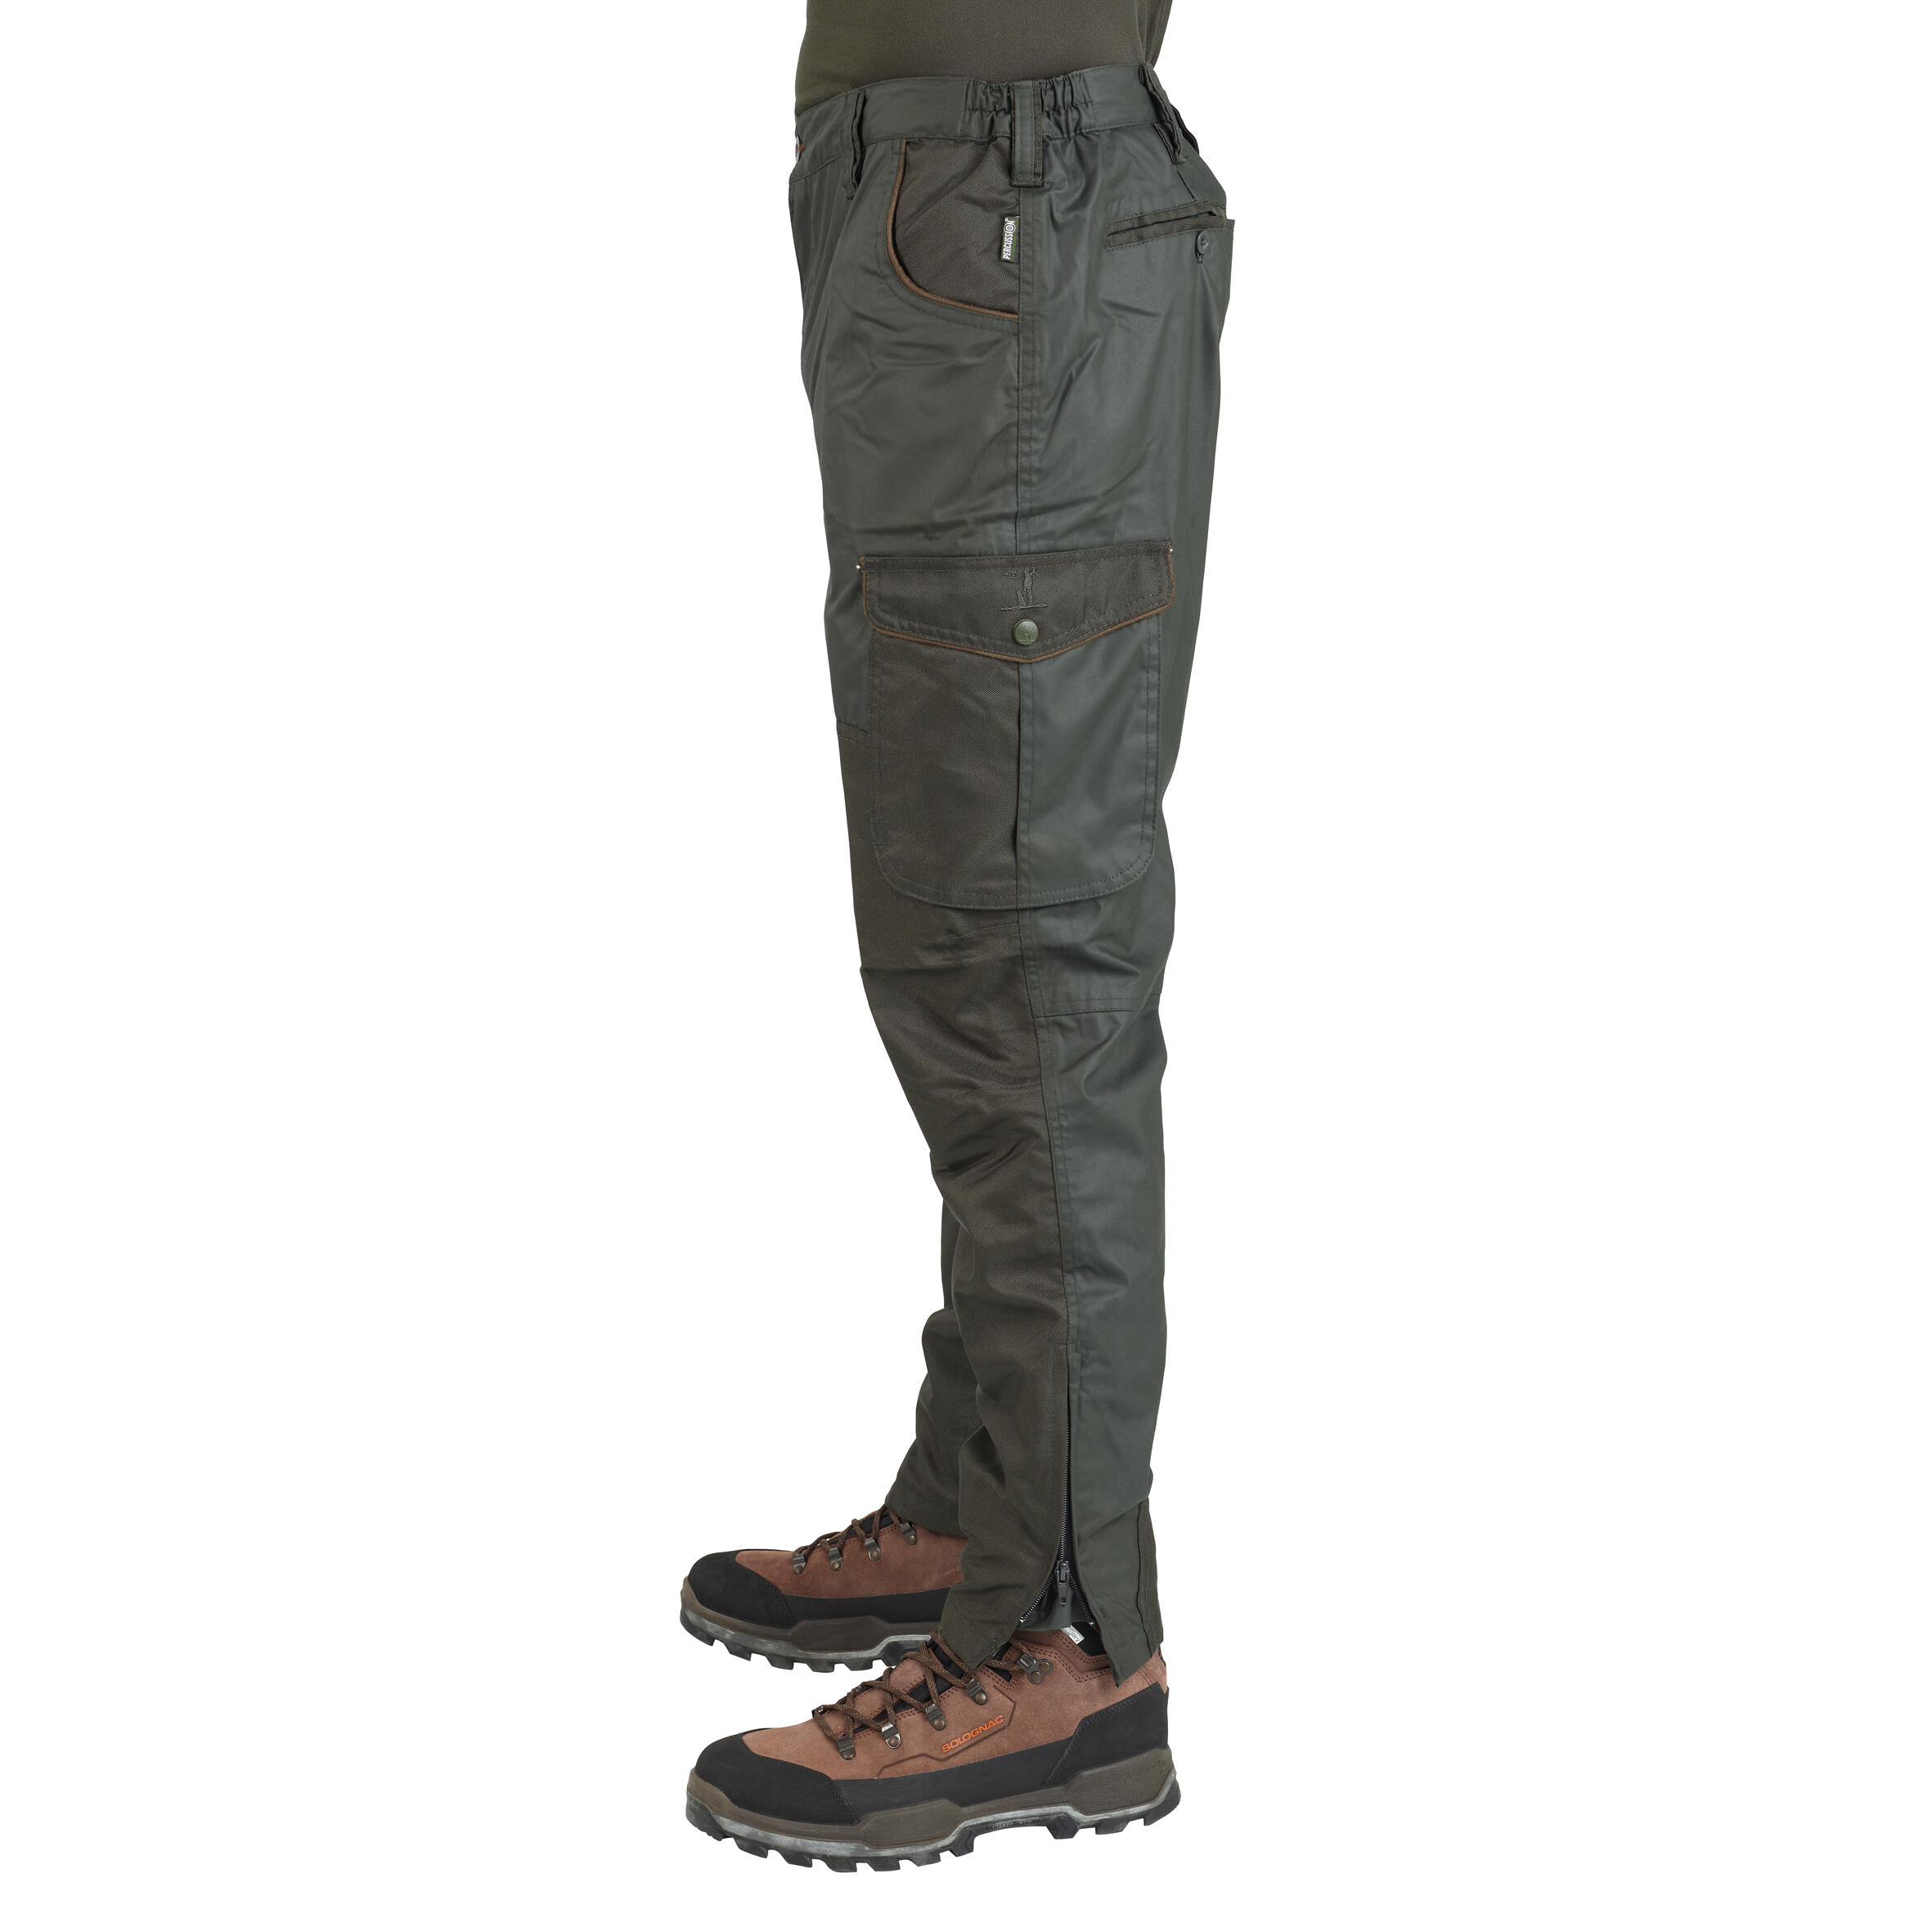 Impertane Tapered Country Sport Trousers - Green 5/14